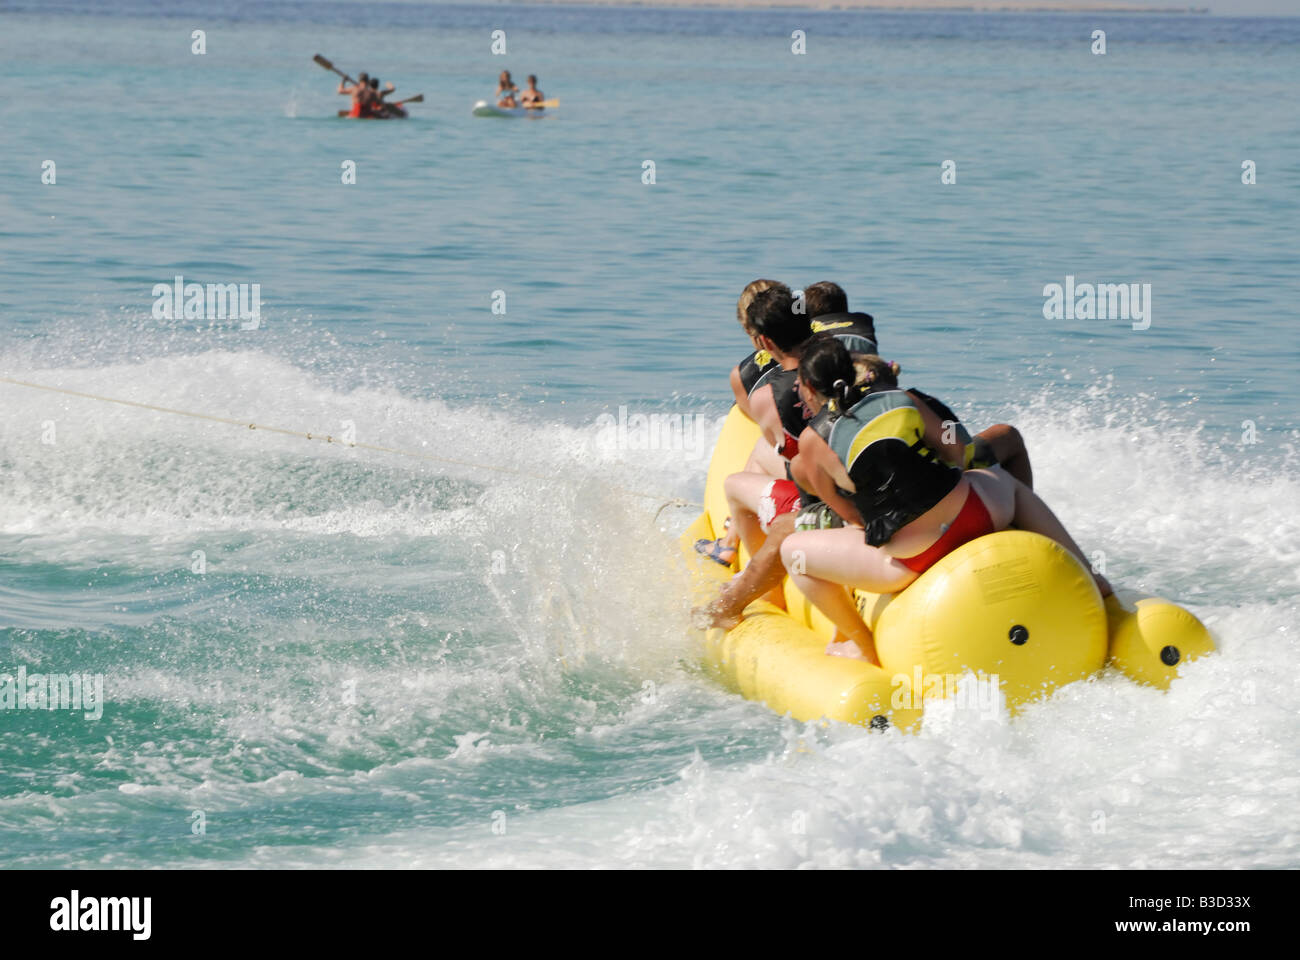 A banana boat ride in the Red Sea Hurghada Egypt Stock Photo